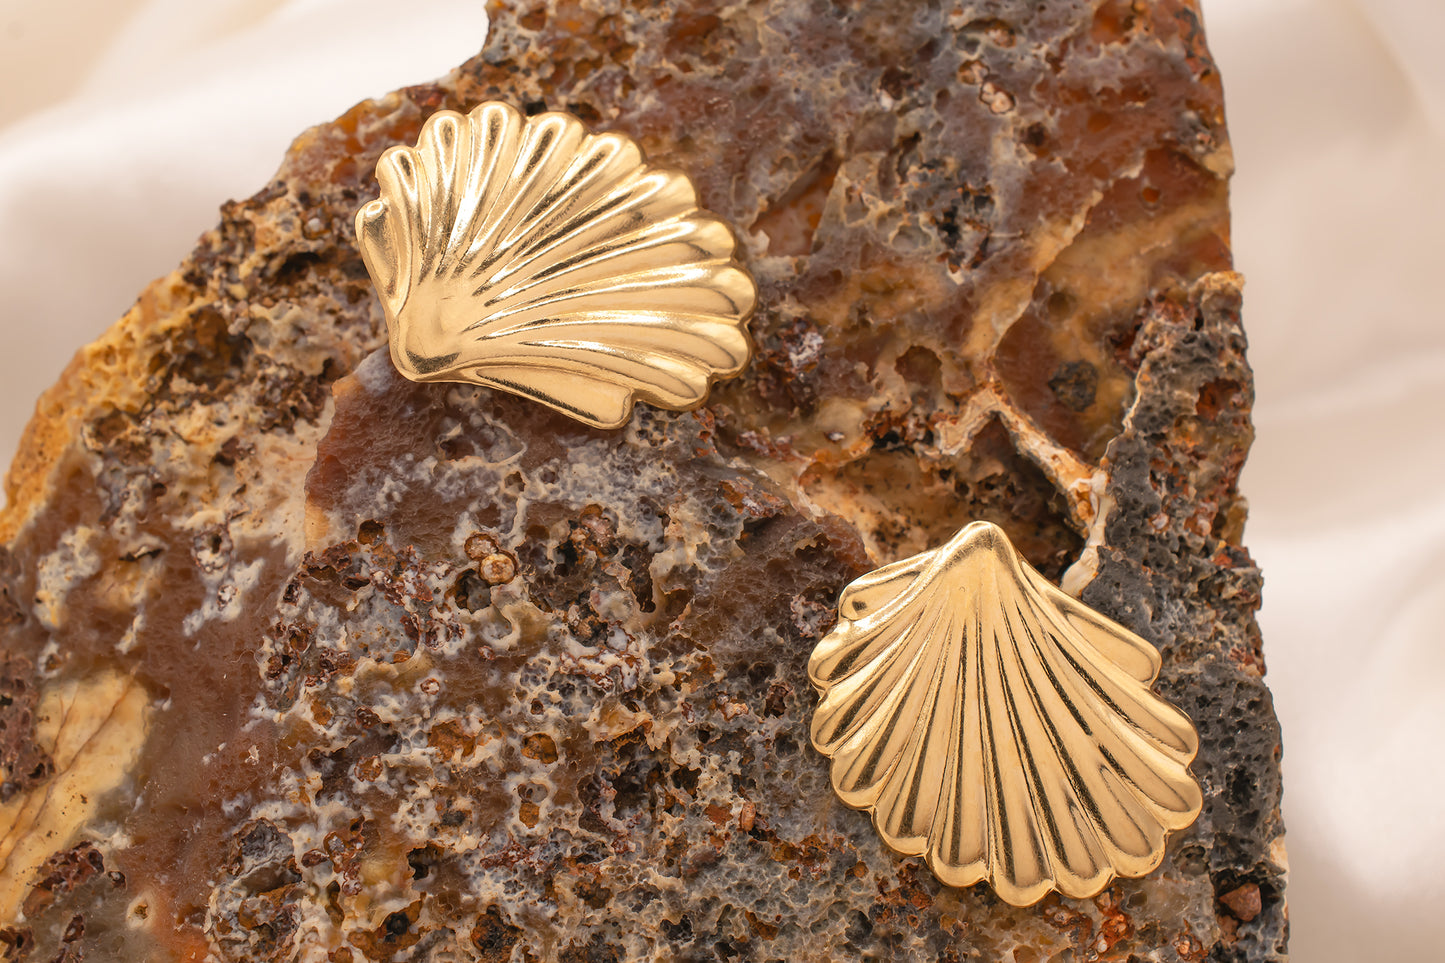 Vintage 14K Yellow Gold Seashell Statement Earrings 1.2 Inches Long Circa 80s